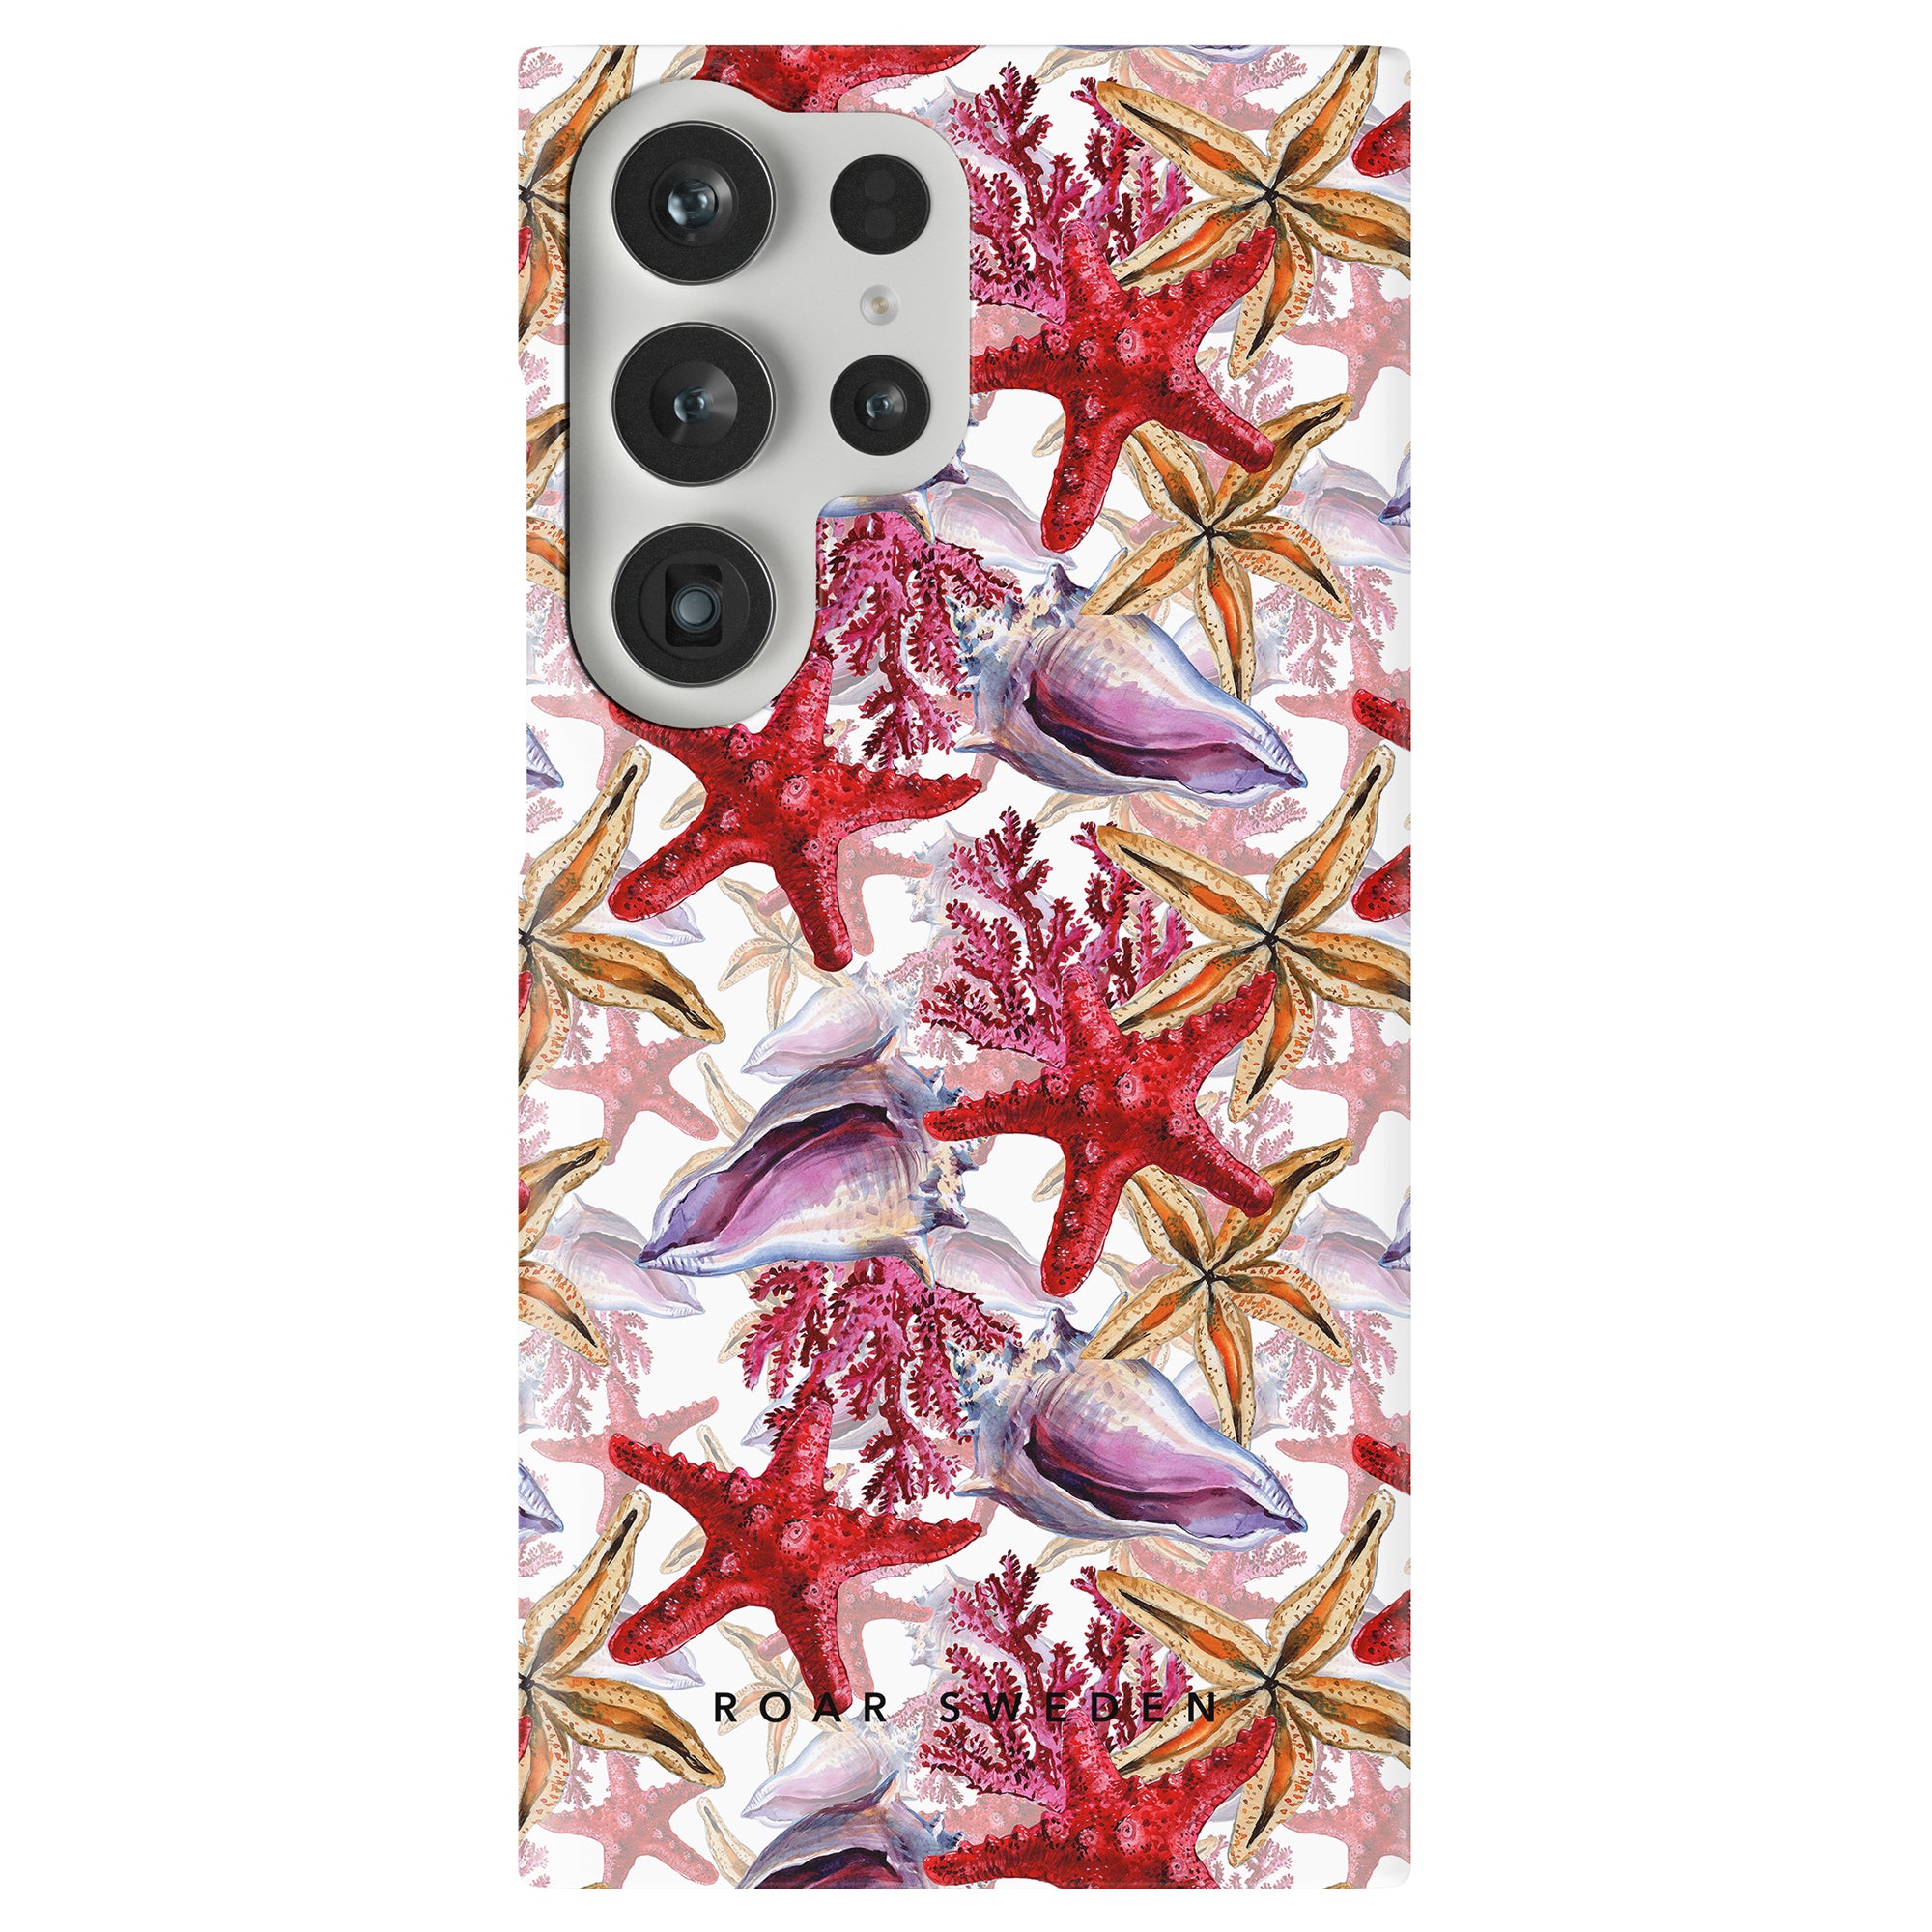 Waterproof Coral Reef - Slim case with starfish pattern and camera cutouts.